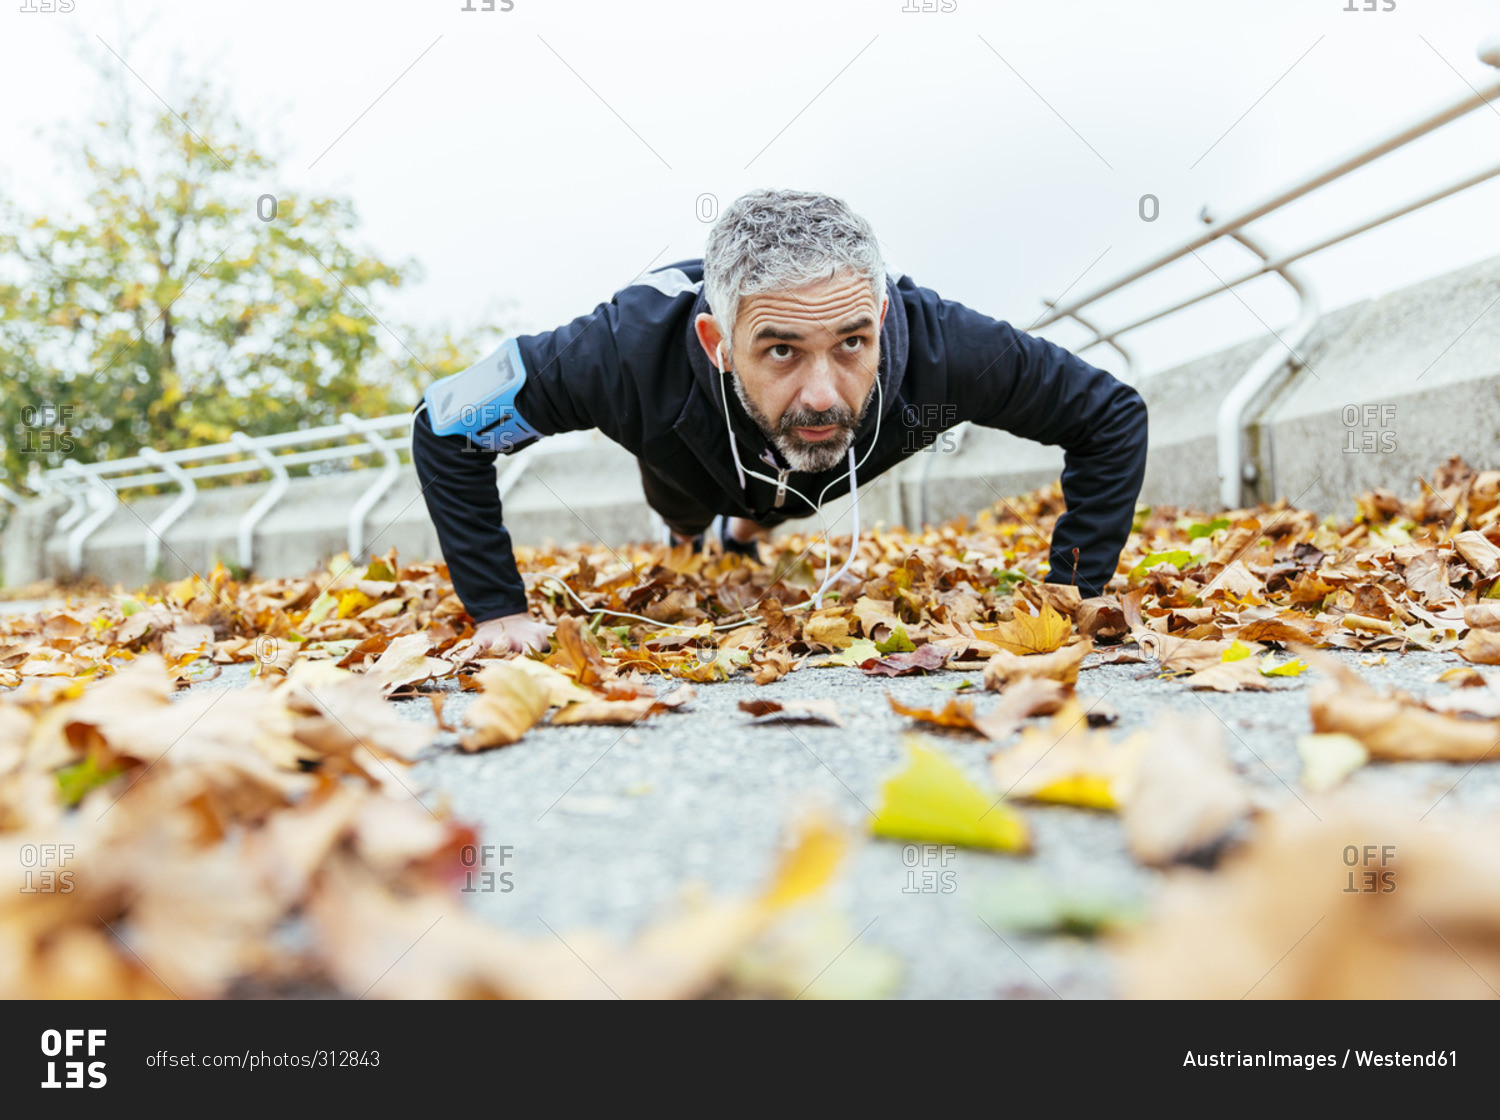 Man doing pushups surrounded by autumn leaves